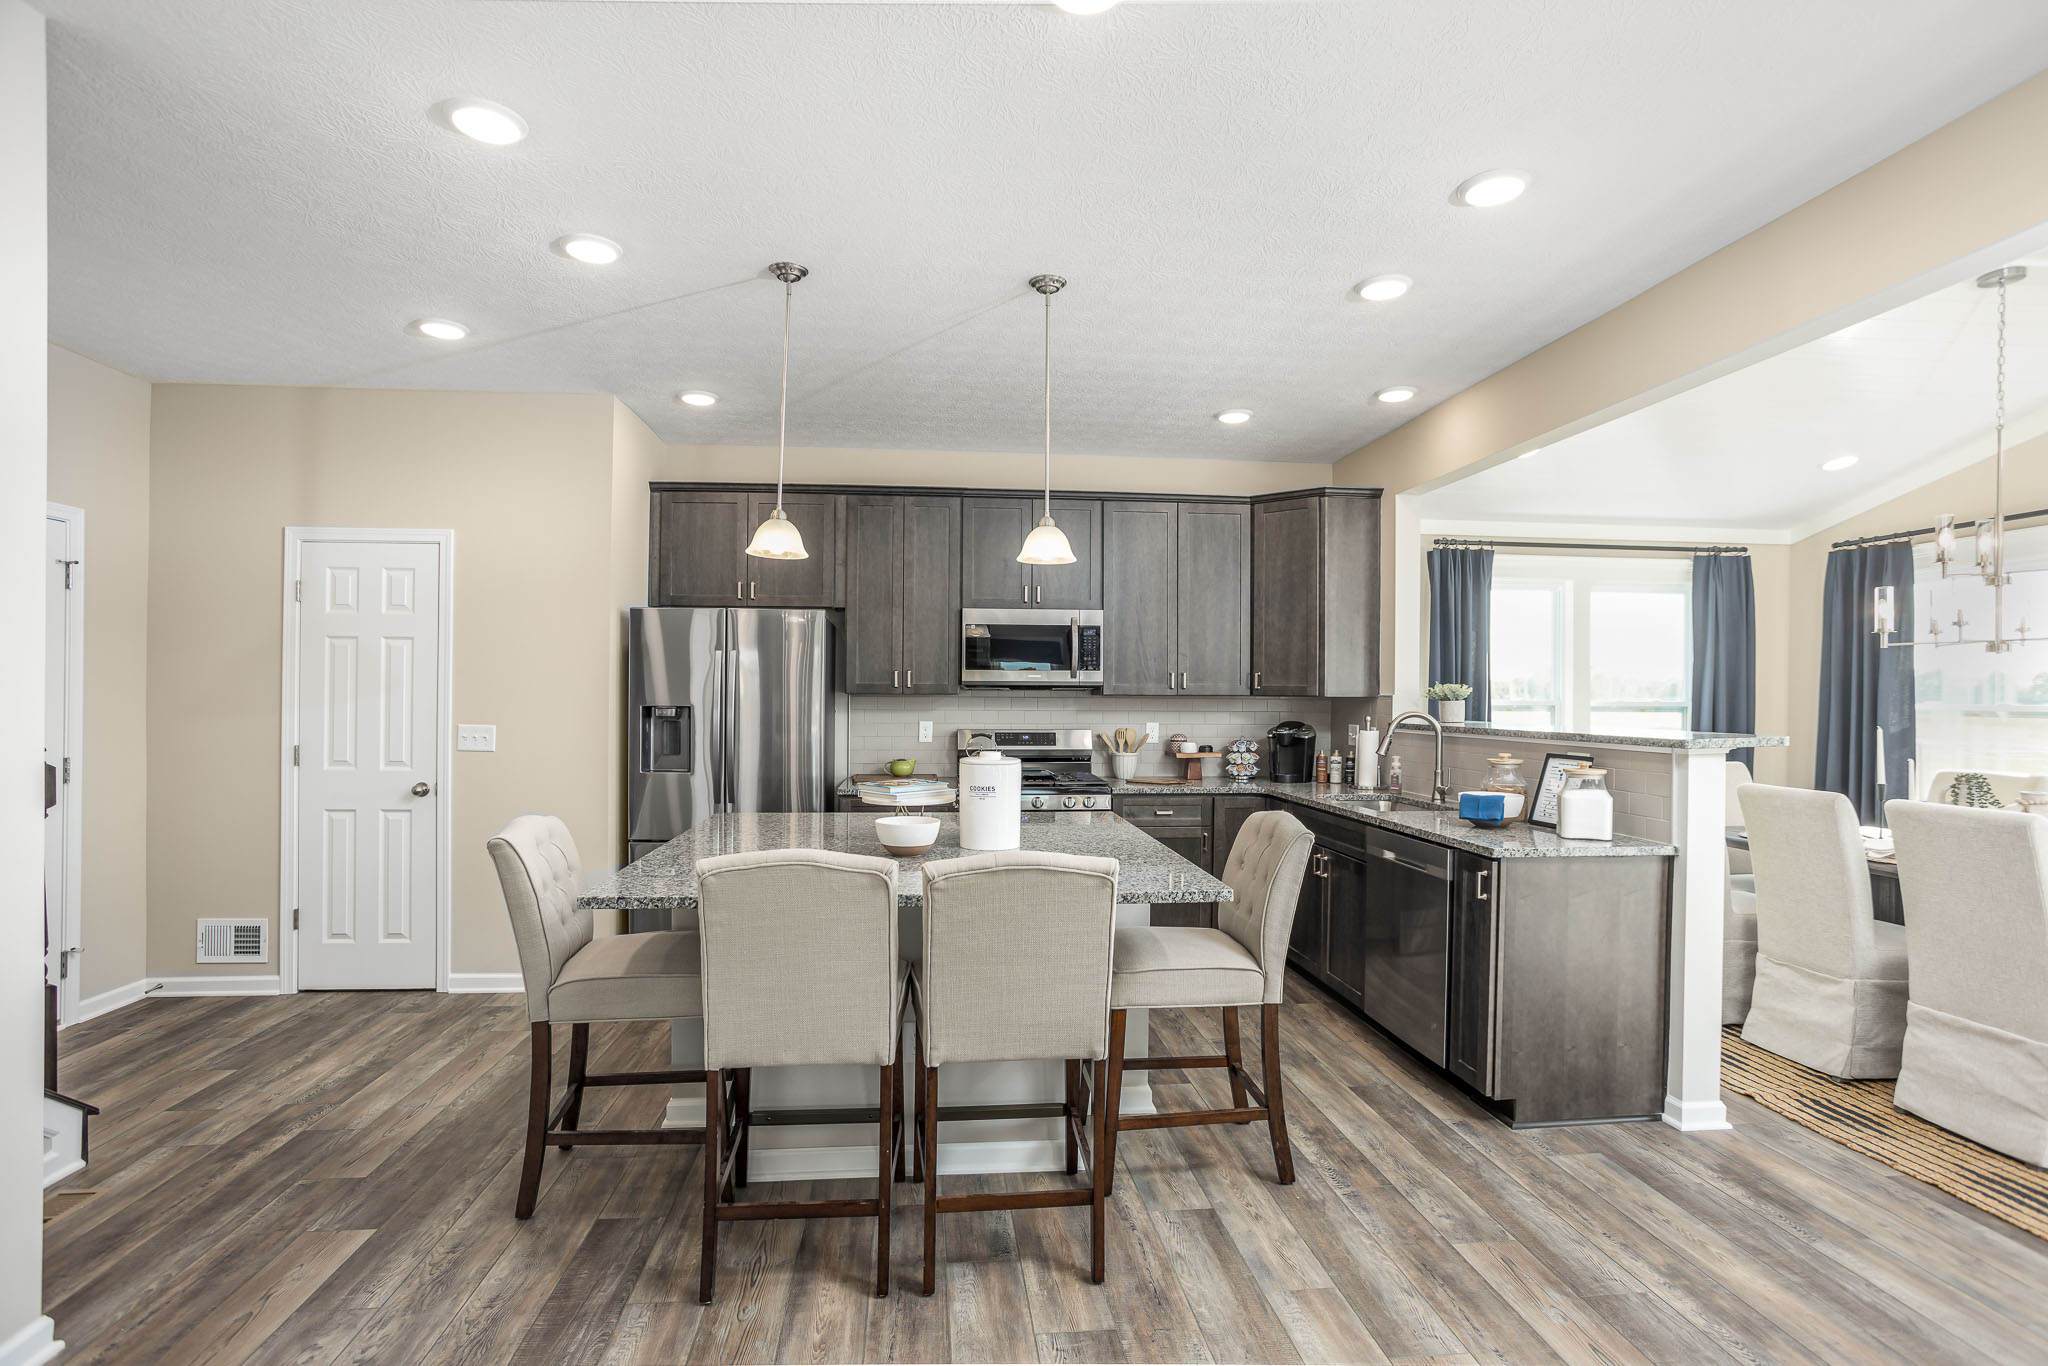 Open floor plan of a new home for sale in Butler County, PA